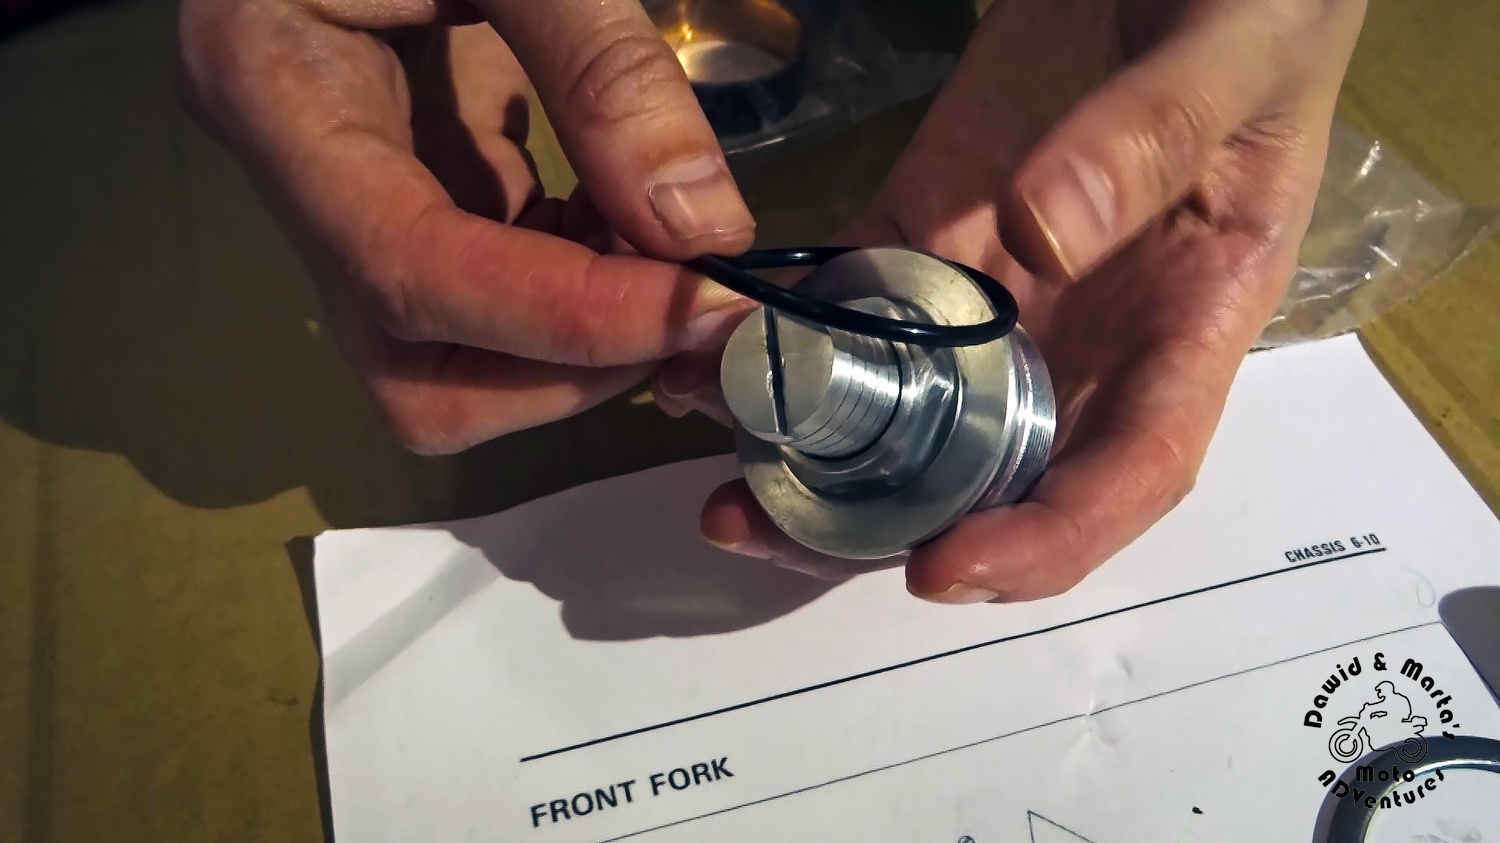 Putting oring on the fork cap